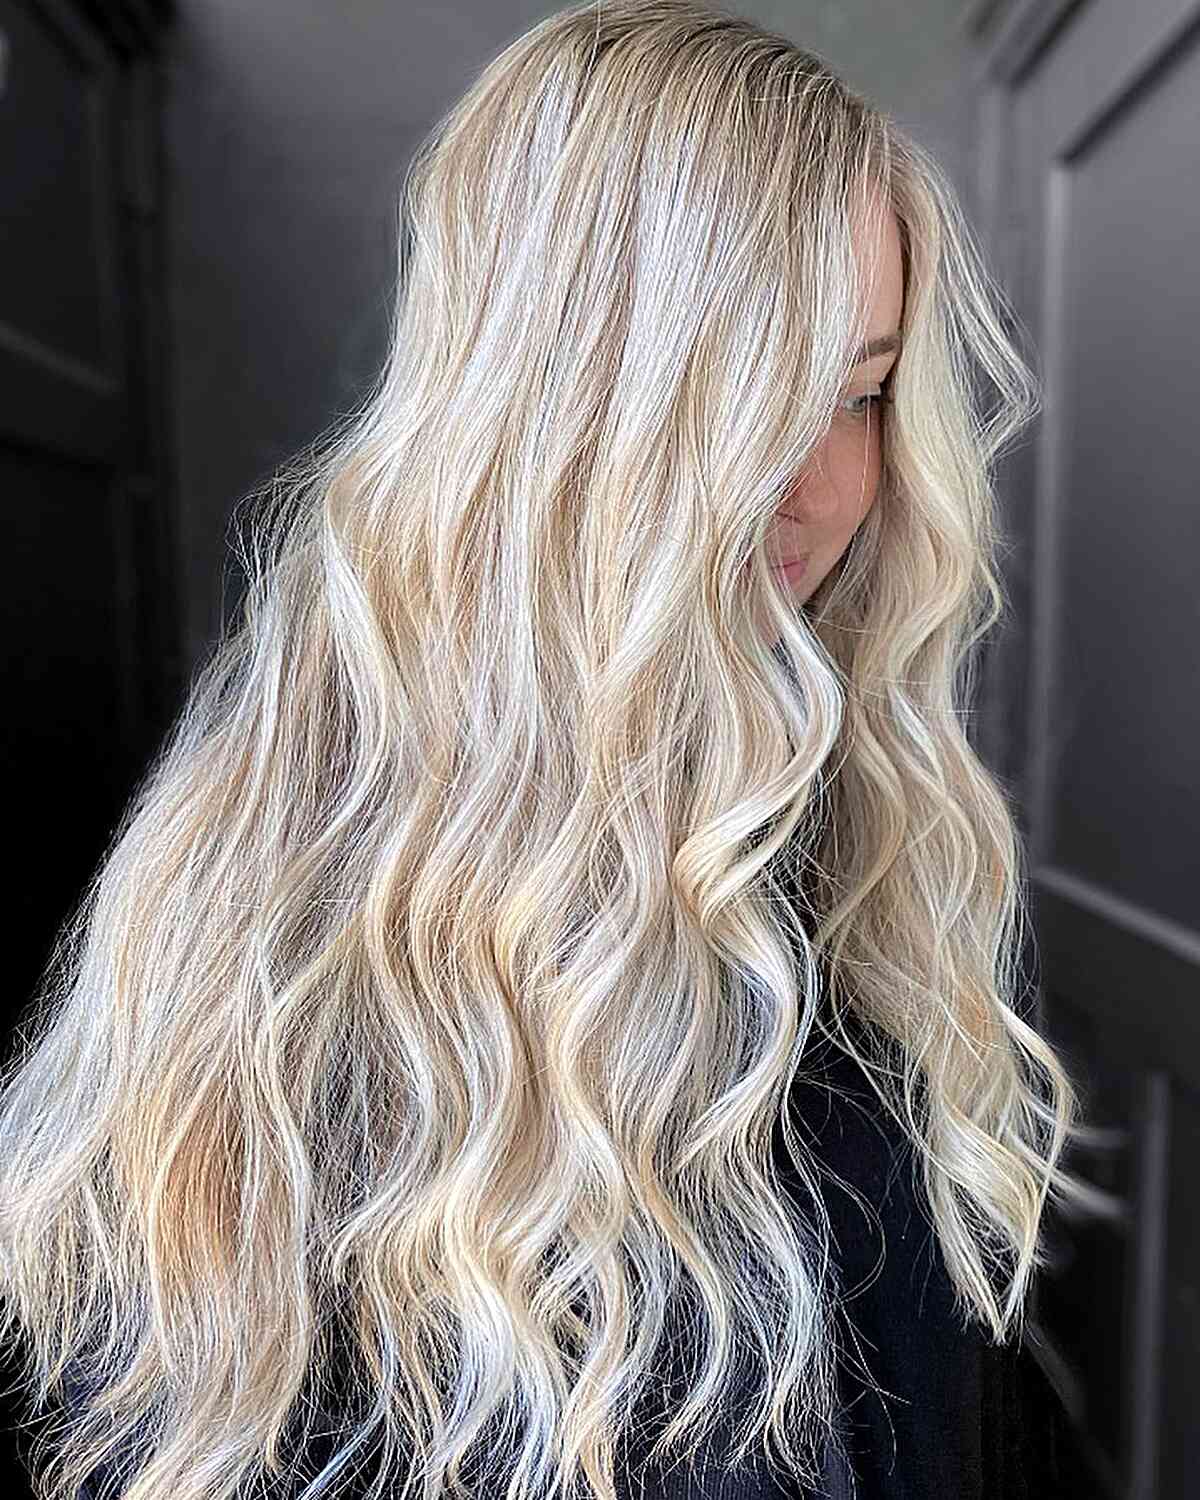 Barbie Blonde Hair: 25 Best Examples of The Hottest Hair Color Right Now